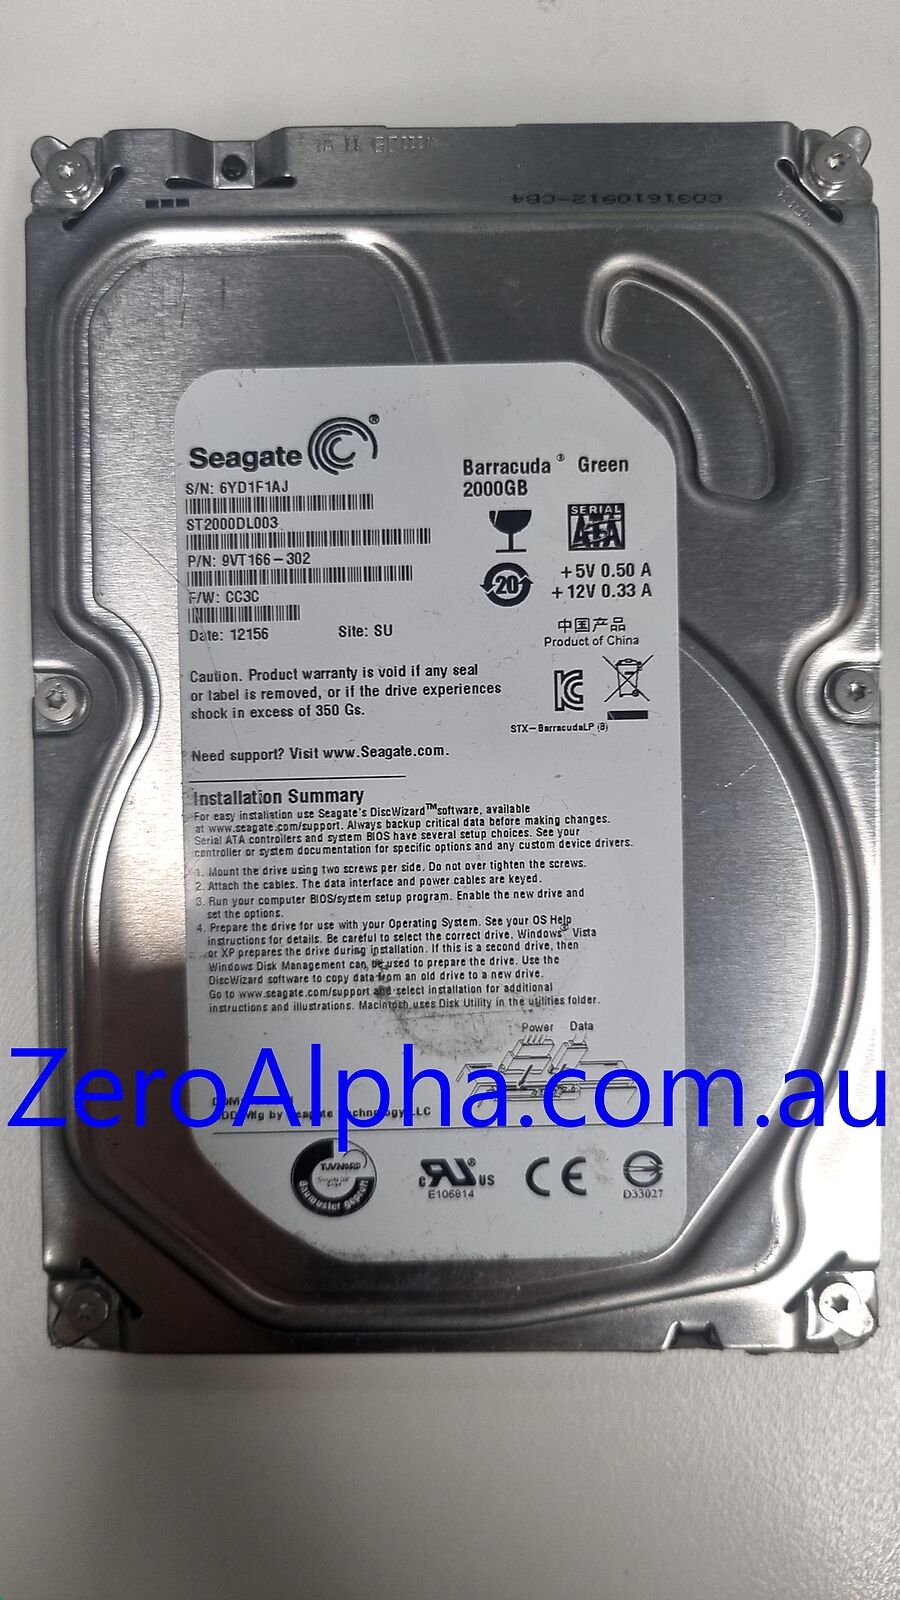 ST2000DL003, 9VT166-302, CC3C, SU, 6YD1 Seagate Data Recovery Donor Hard Drive